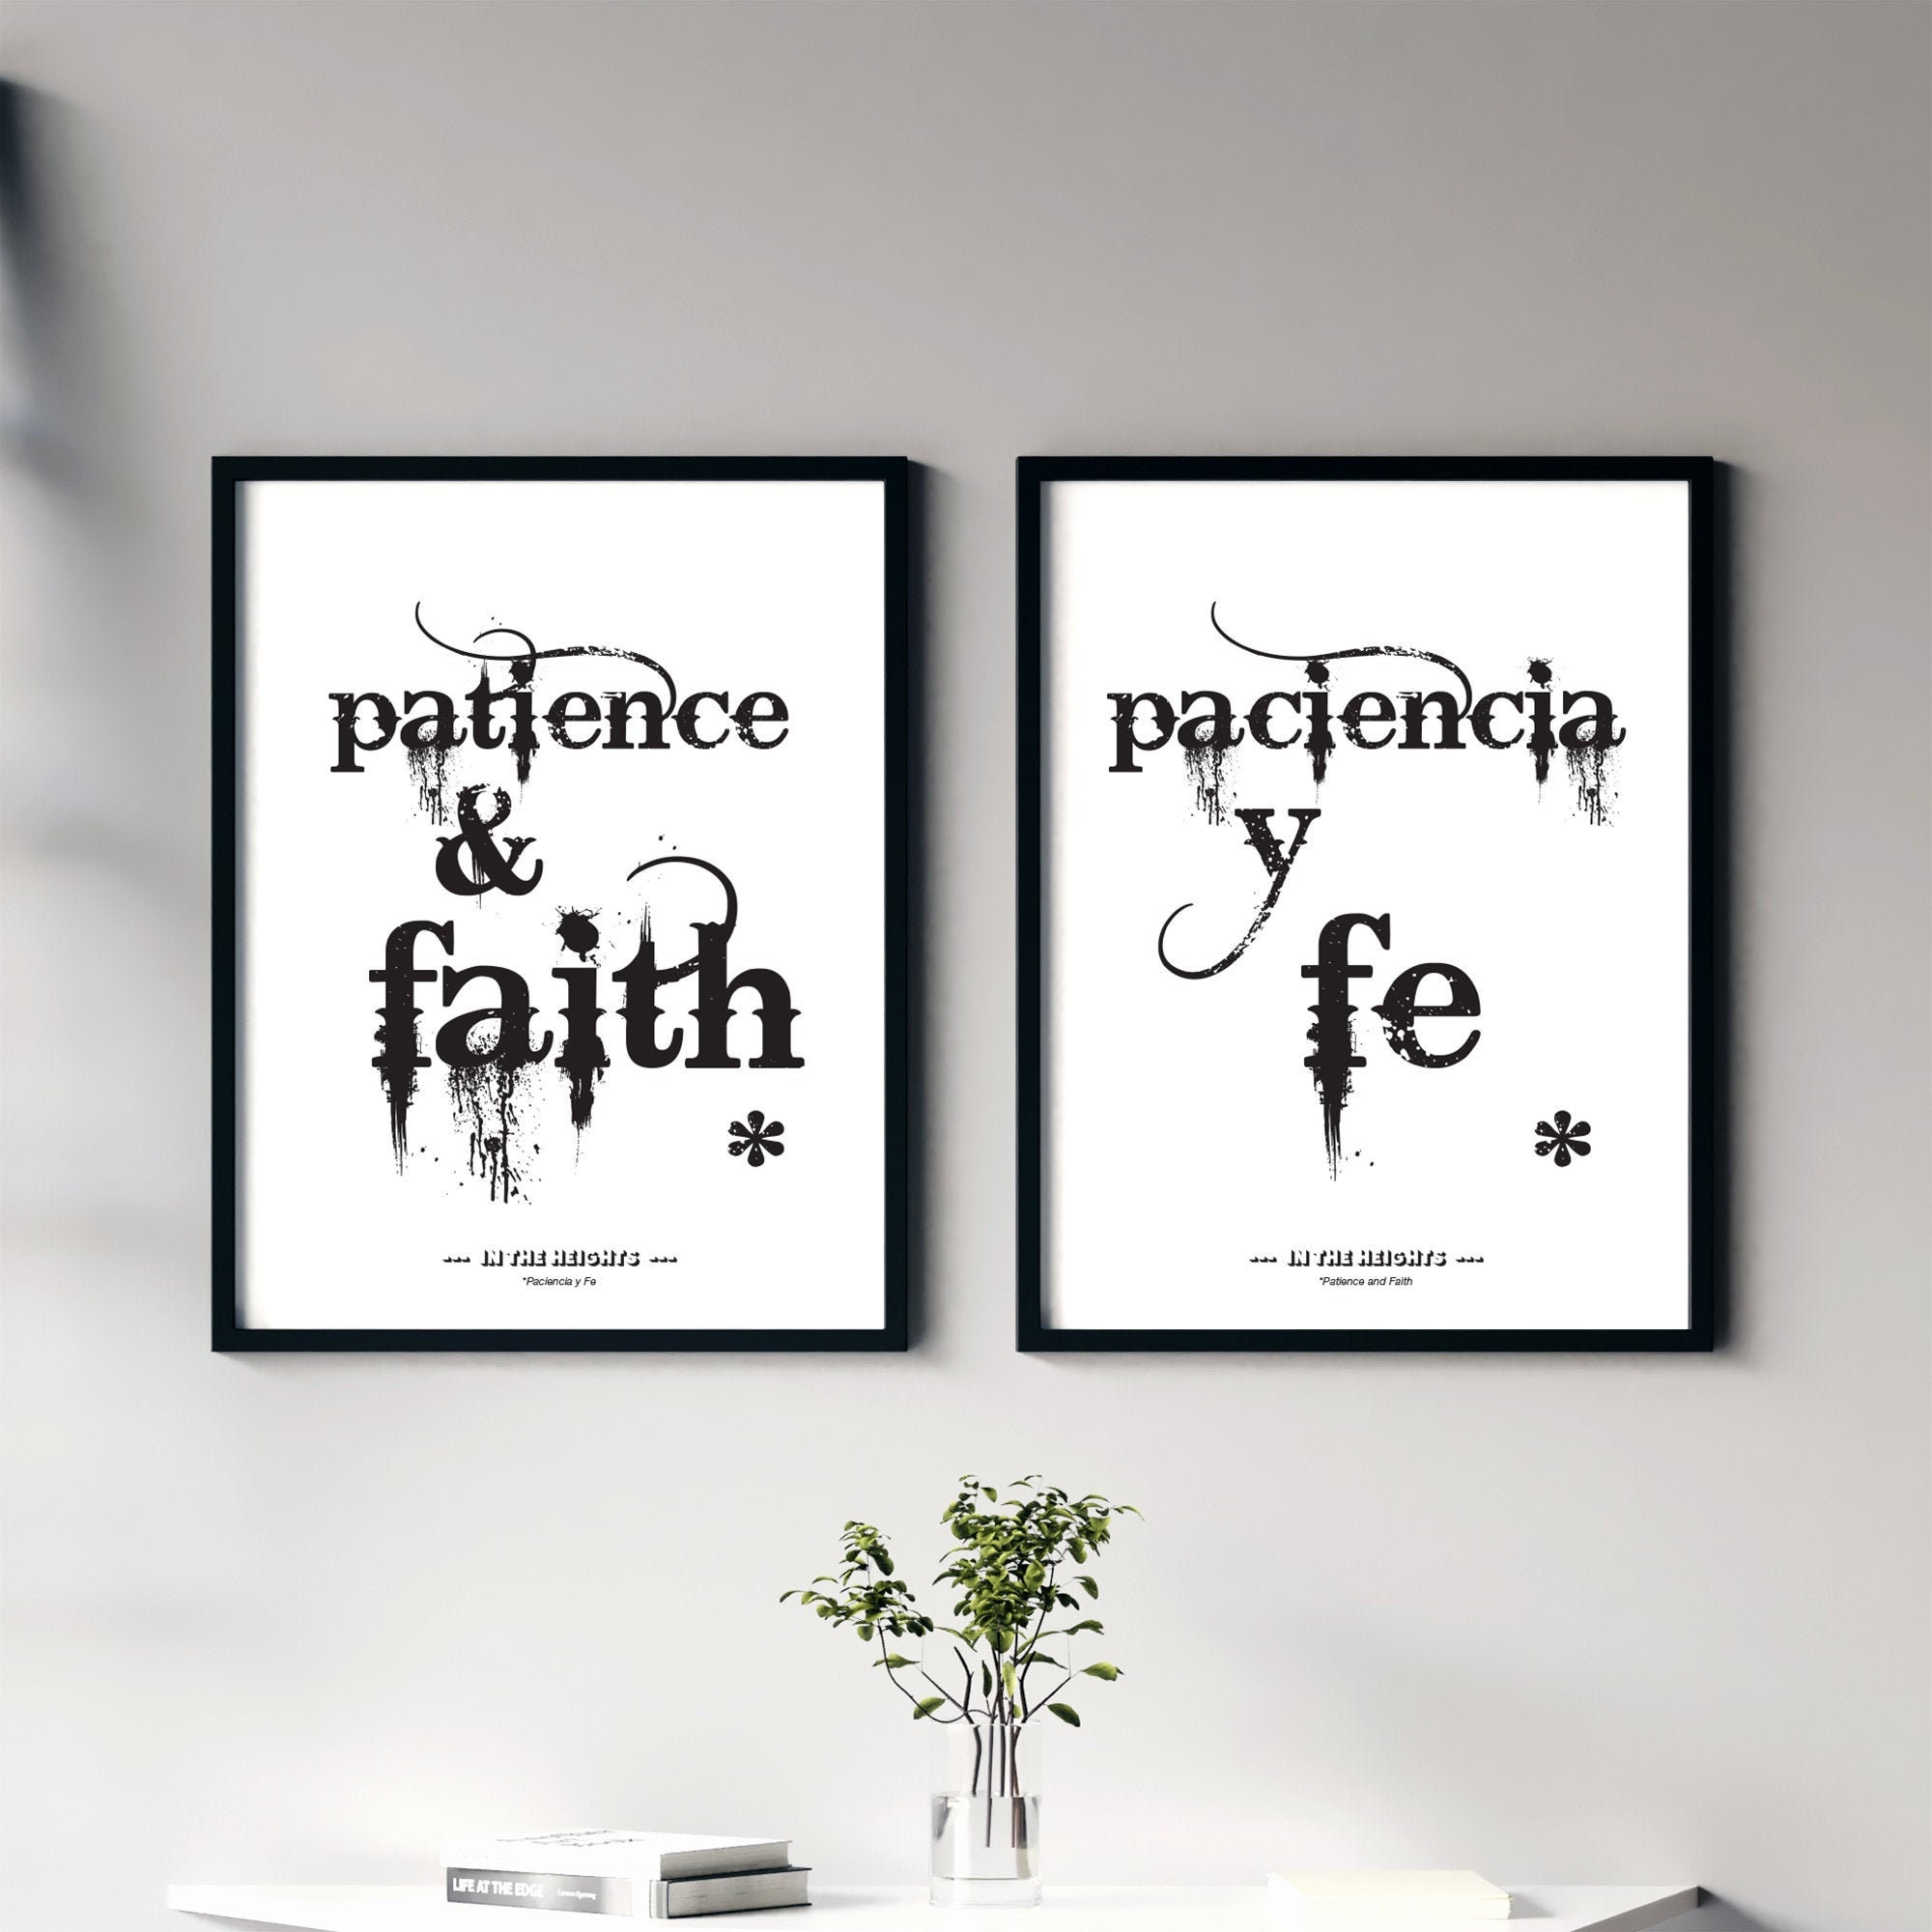 Niall Horan Dear Patience Lyrics Photographic Print for Sale by